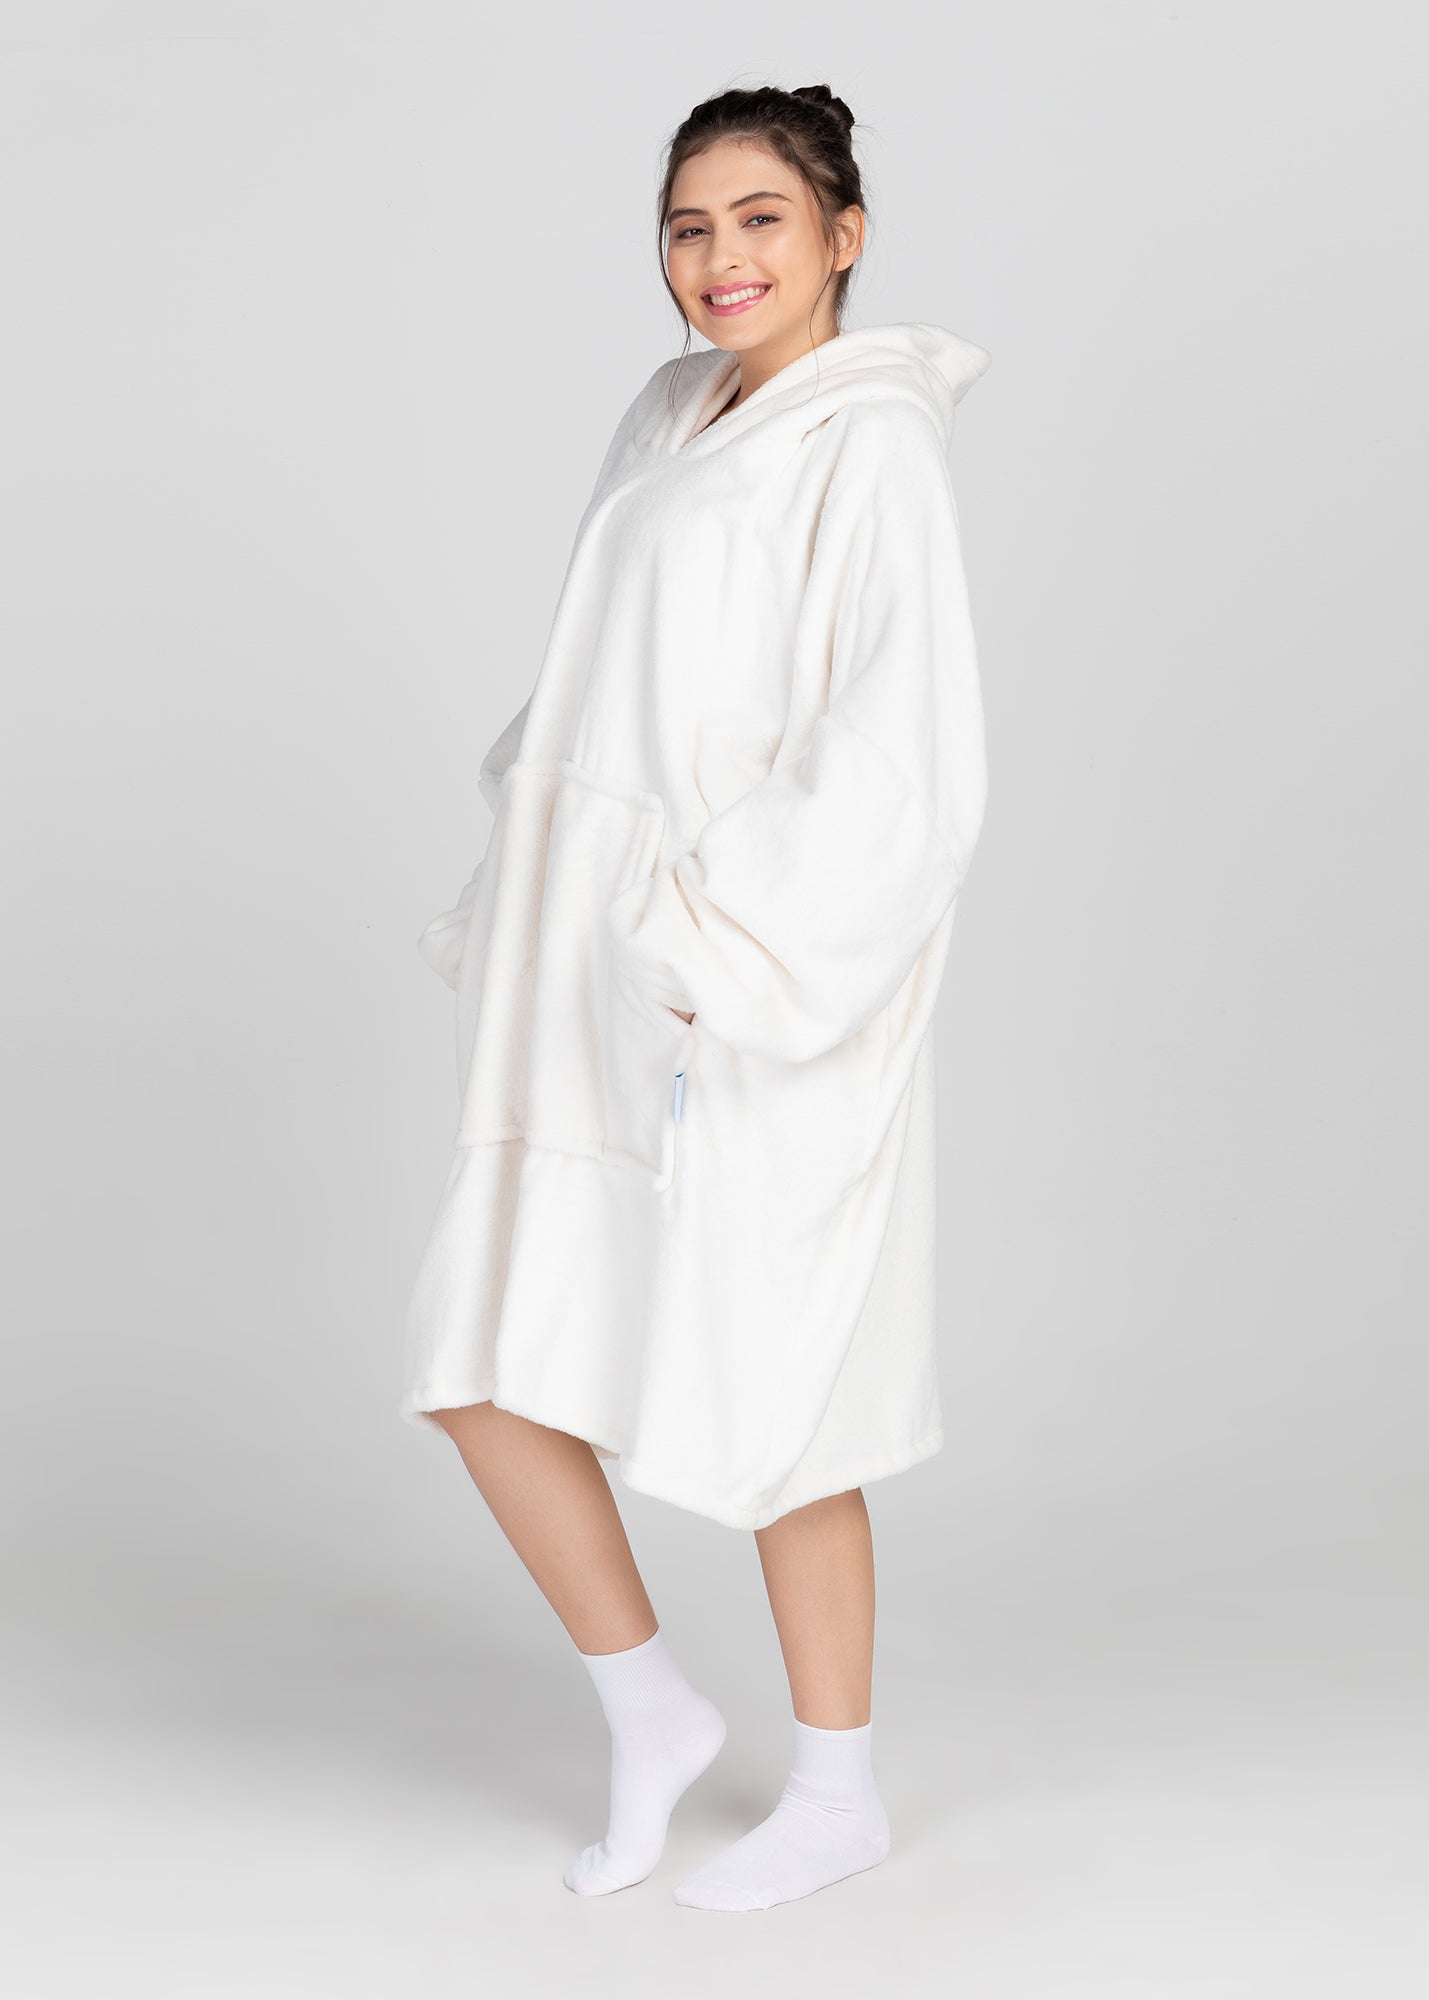 White Luxe - extra thick - The Cloudie Co. ultra soft cosy comfy Giant Wearable Blanket hoodie Unisex home or travel blanket hoodie travel blanket sofa blanket with sleeves hoodie blanket